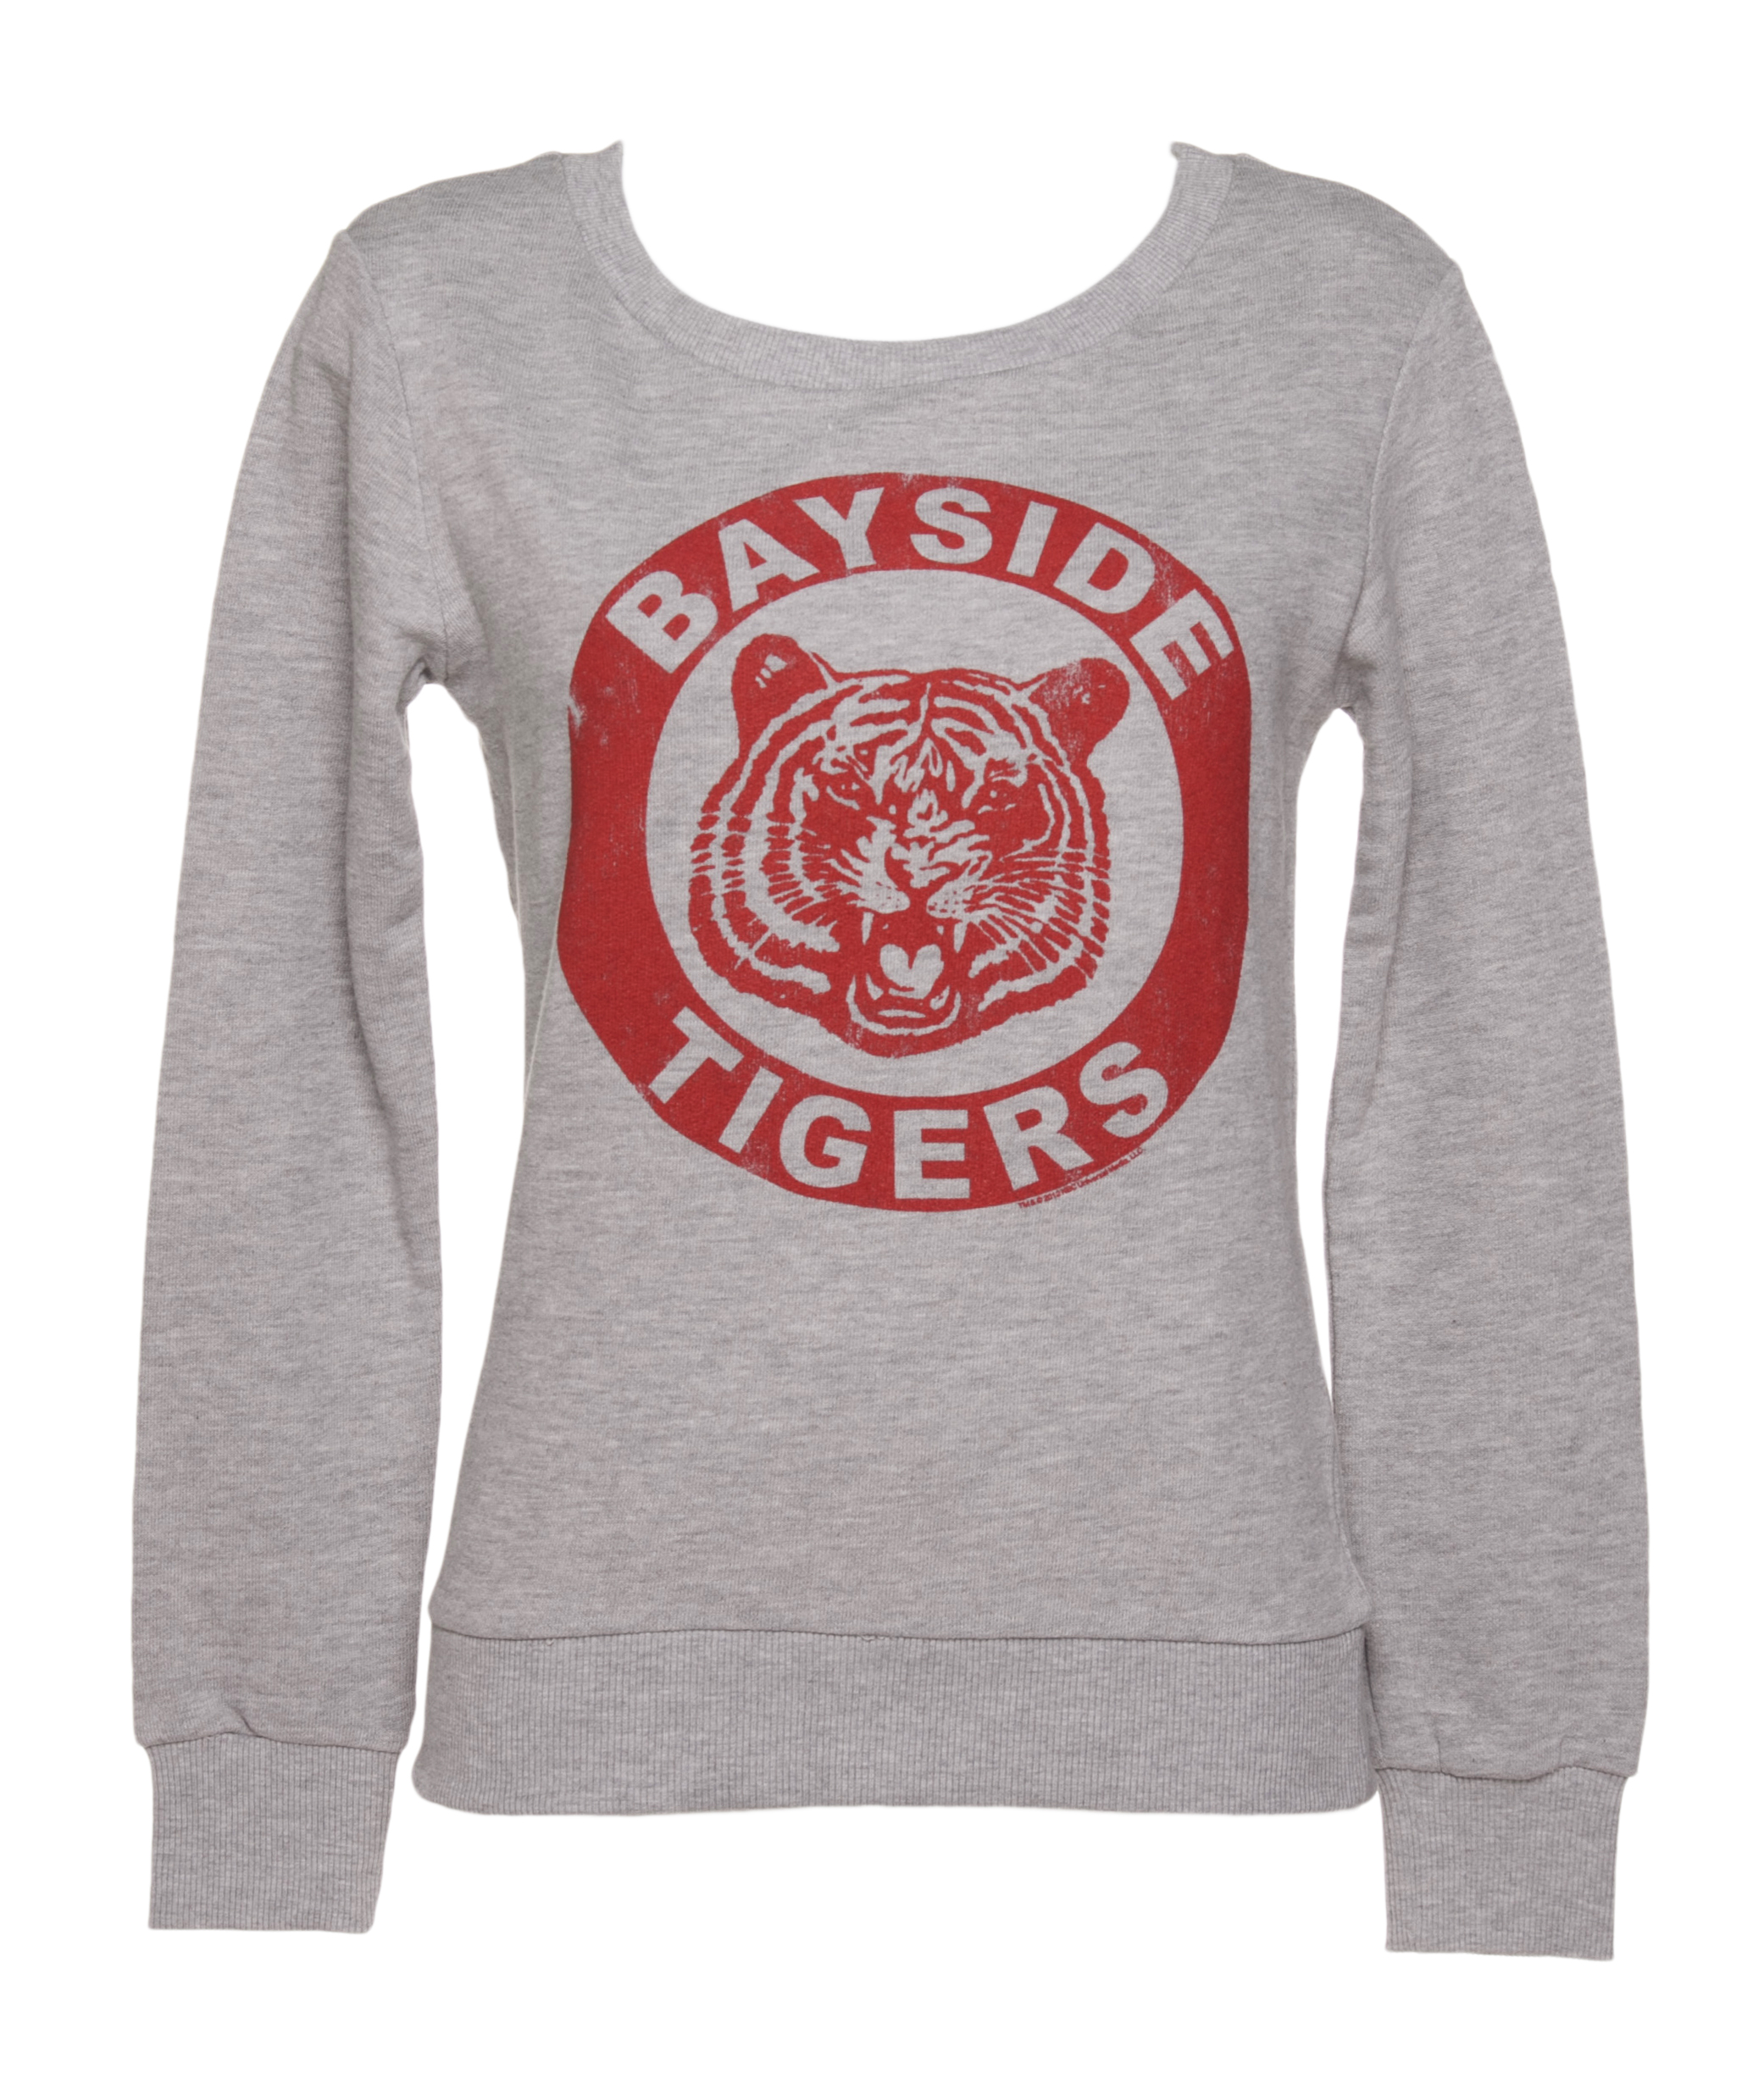 Ladies Grey Saved By The Bell Bayside Tigers Sweater £29.99